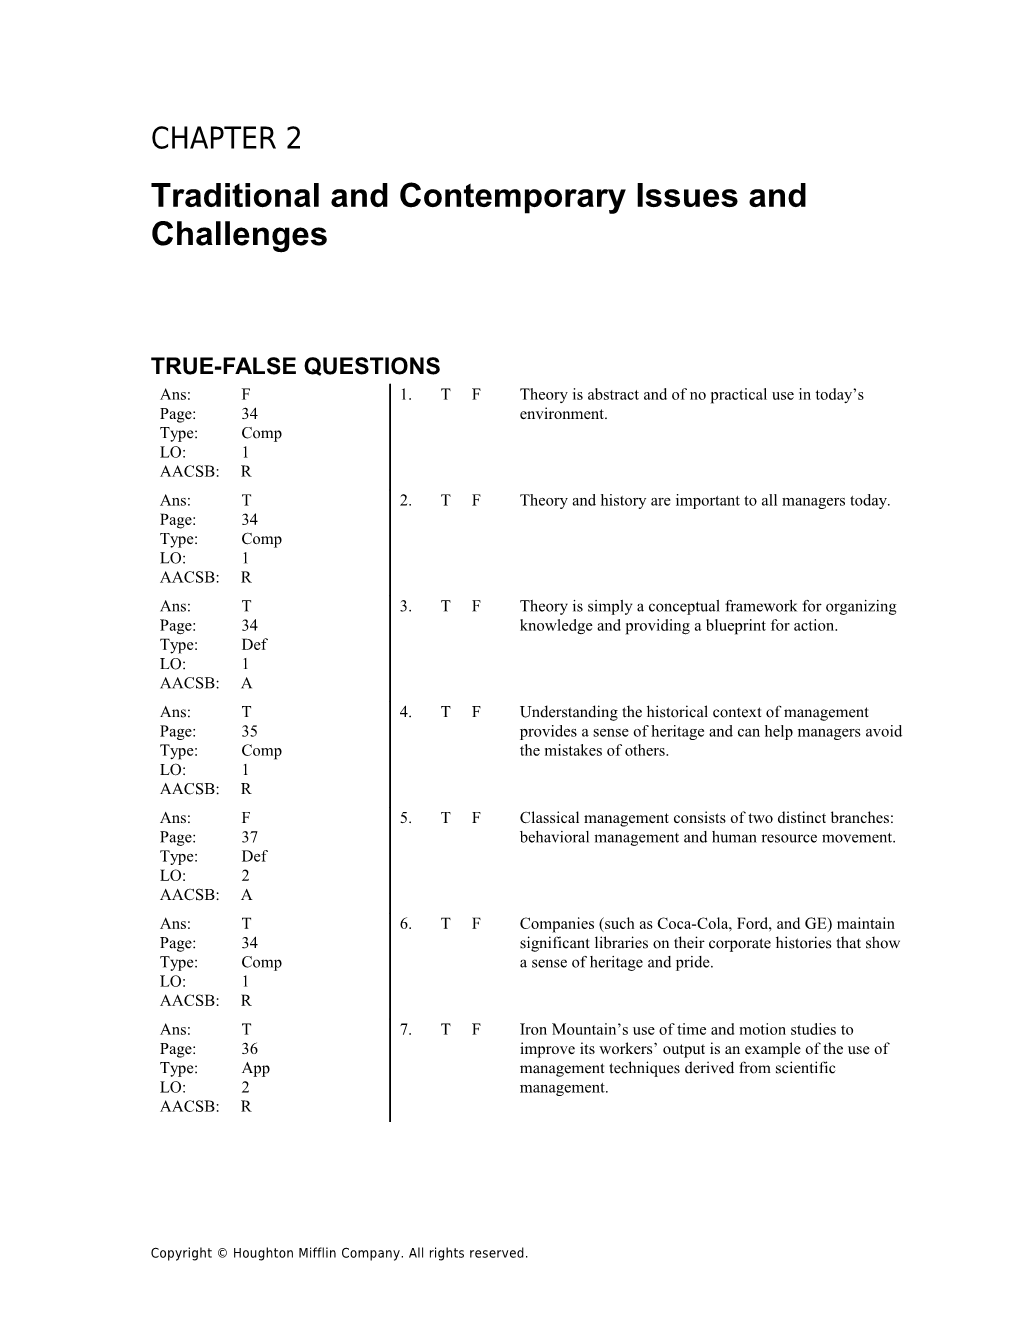 Chapter 2: Traditional and Contemporary Issues and Challenges 1